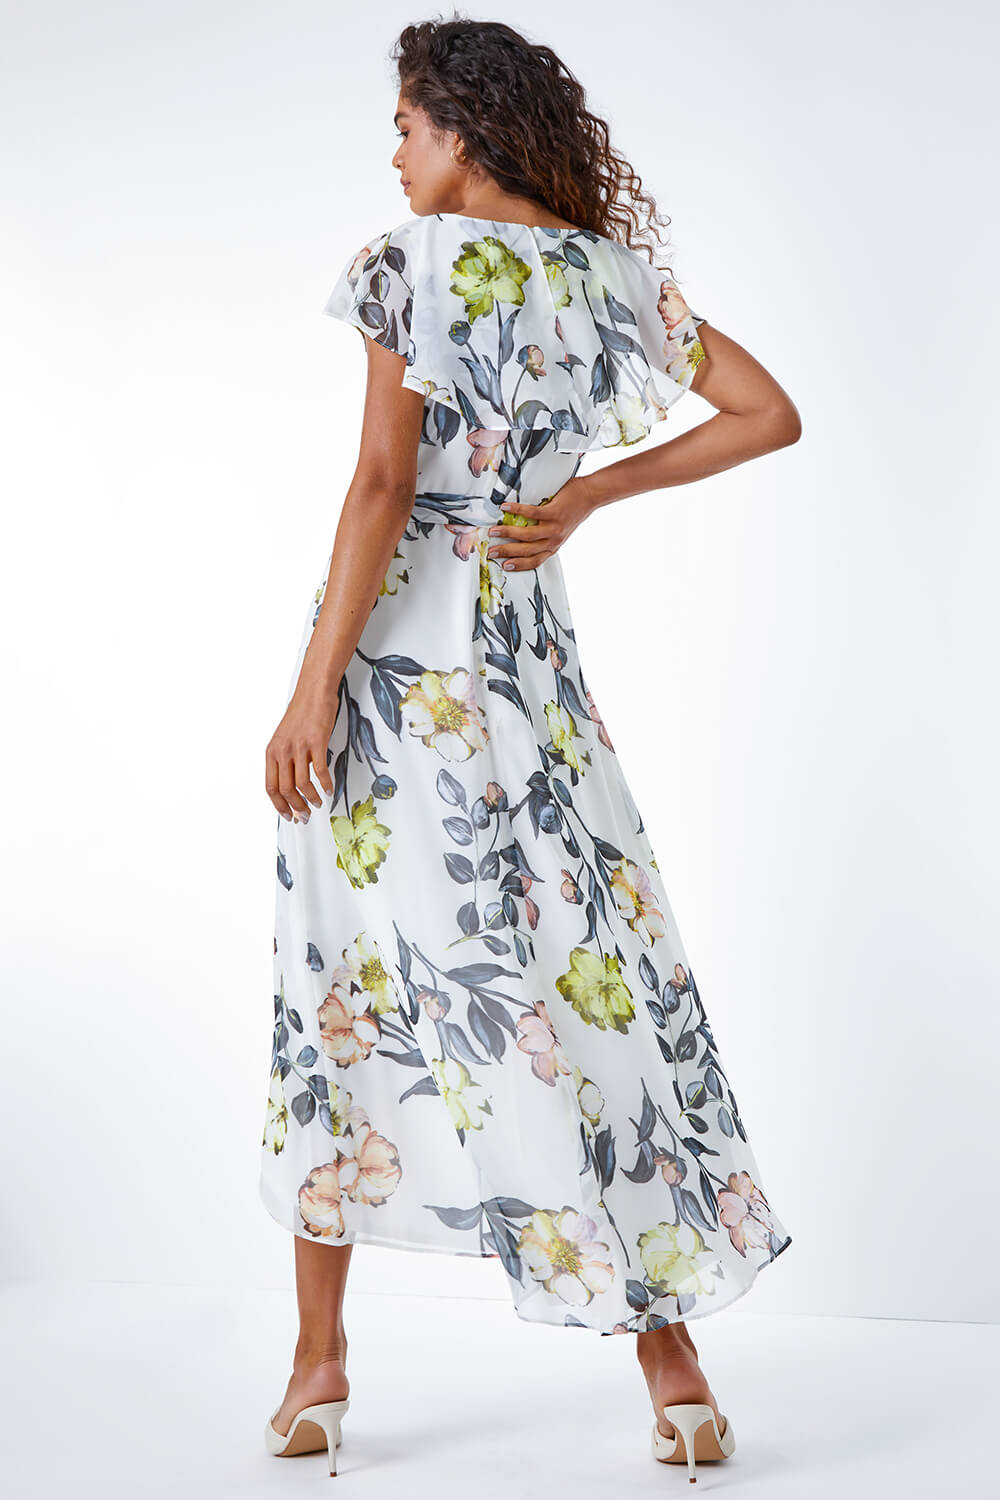 Ivory  Floral Print Frill Cape Wrap Dress, Image 3 of 5